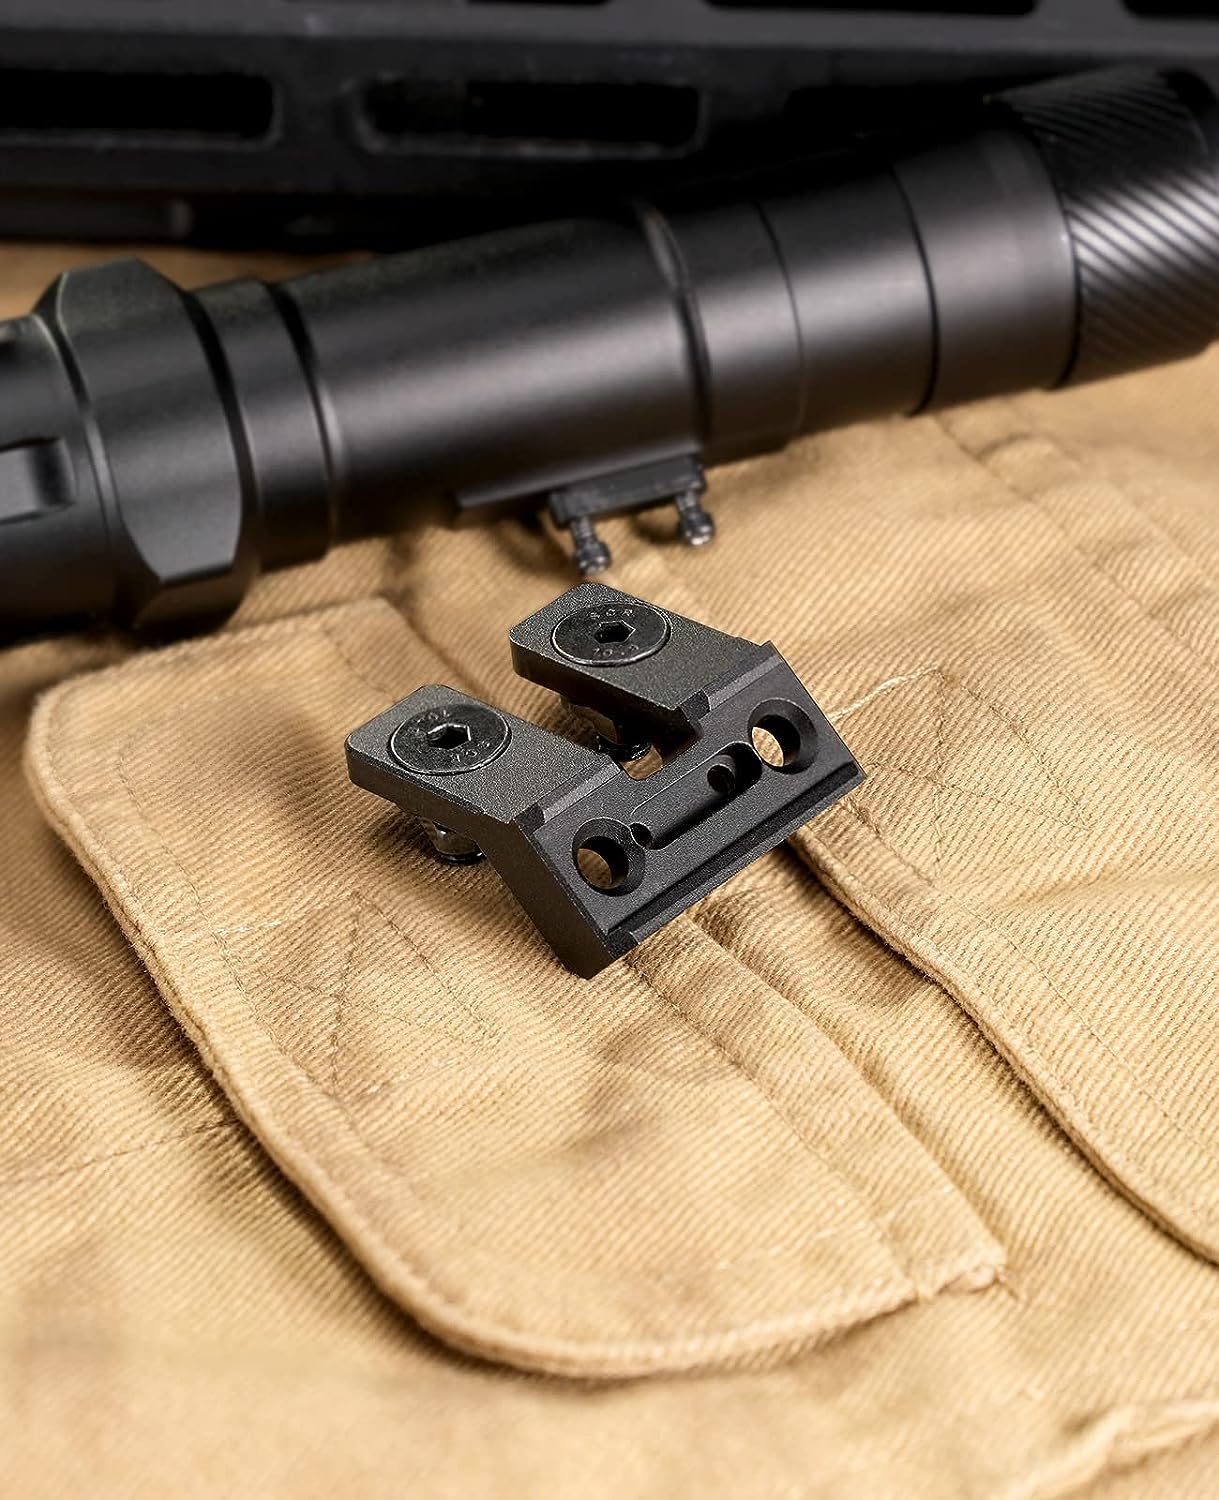 CVLIFE Green Tactical Laser Sight Compatible with Mlok Picatinny Rail